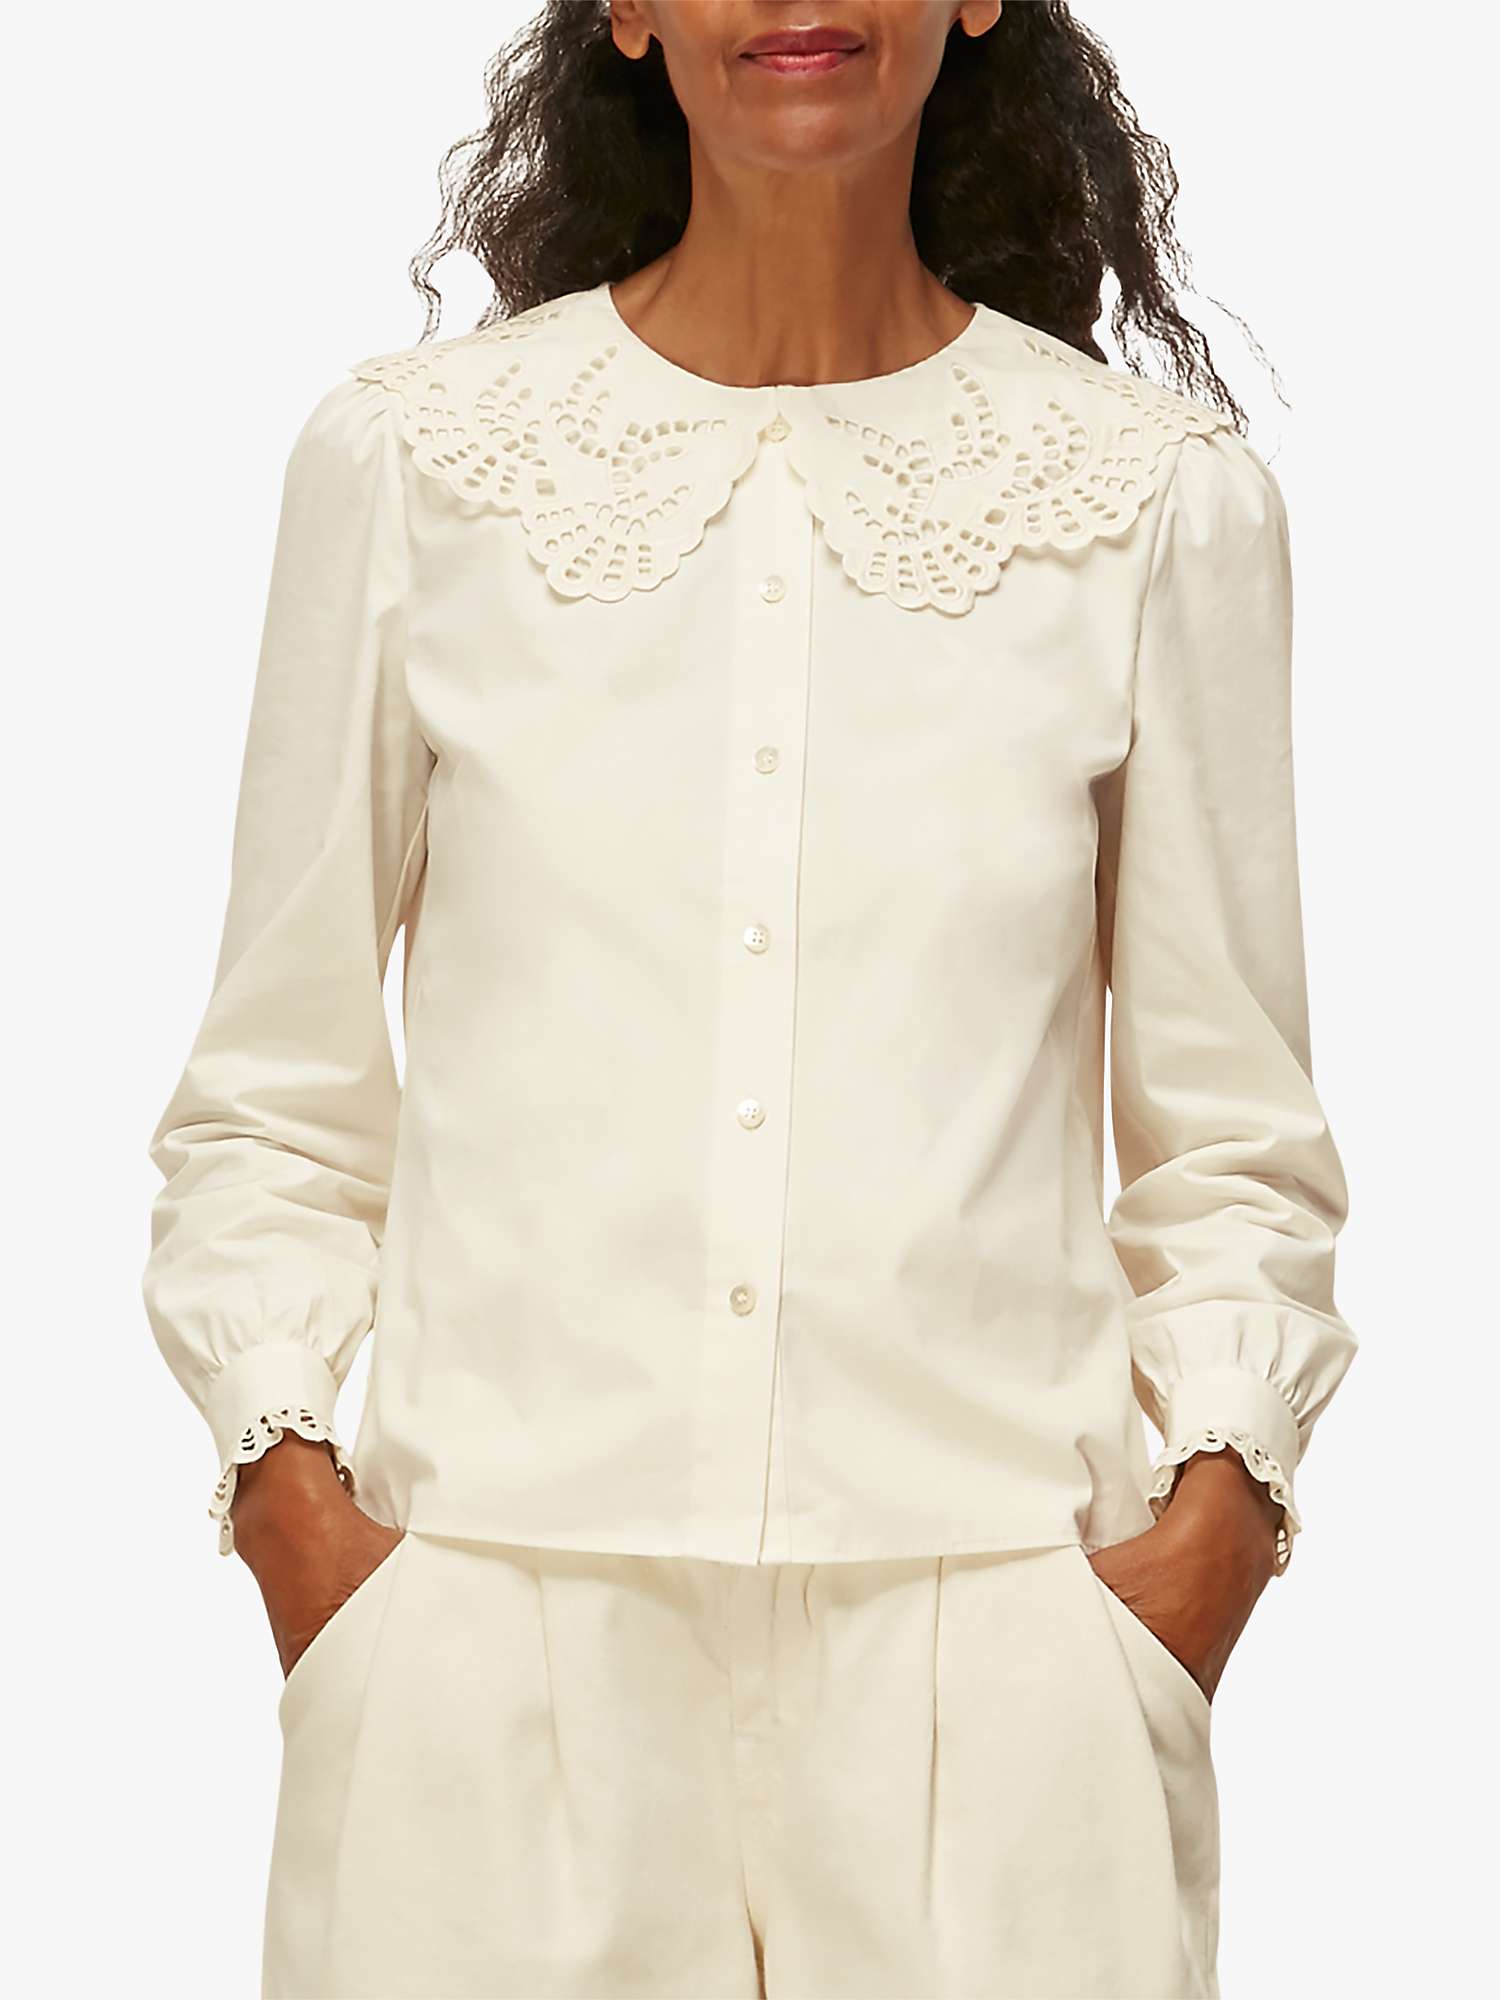 Whistles Lace Collar Cotton Blouse, Ivory at John Lewis  Partners